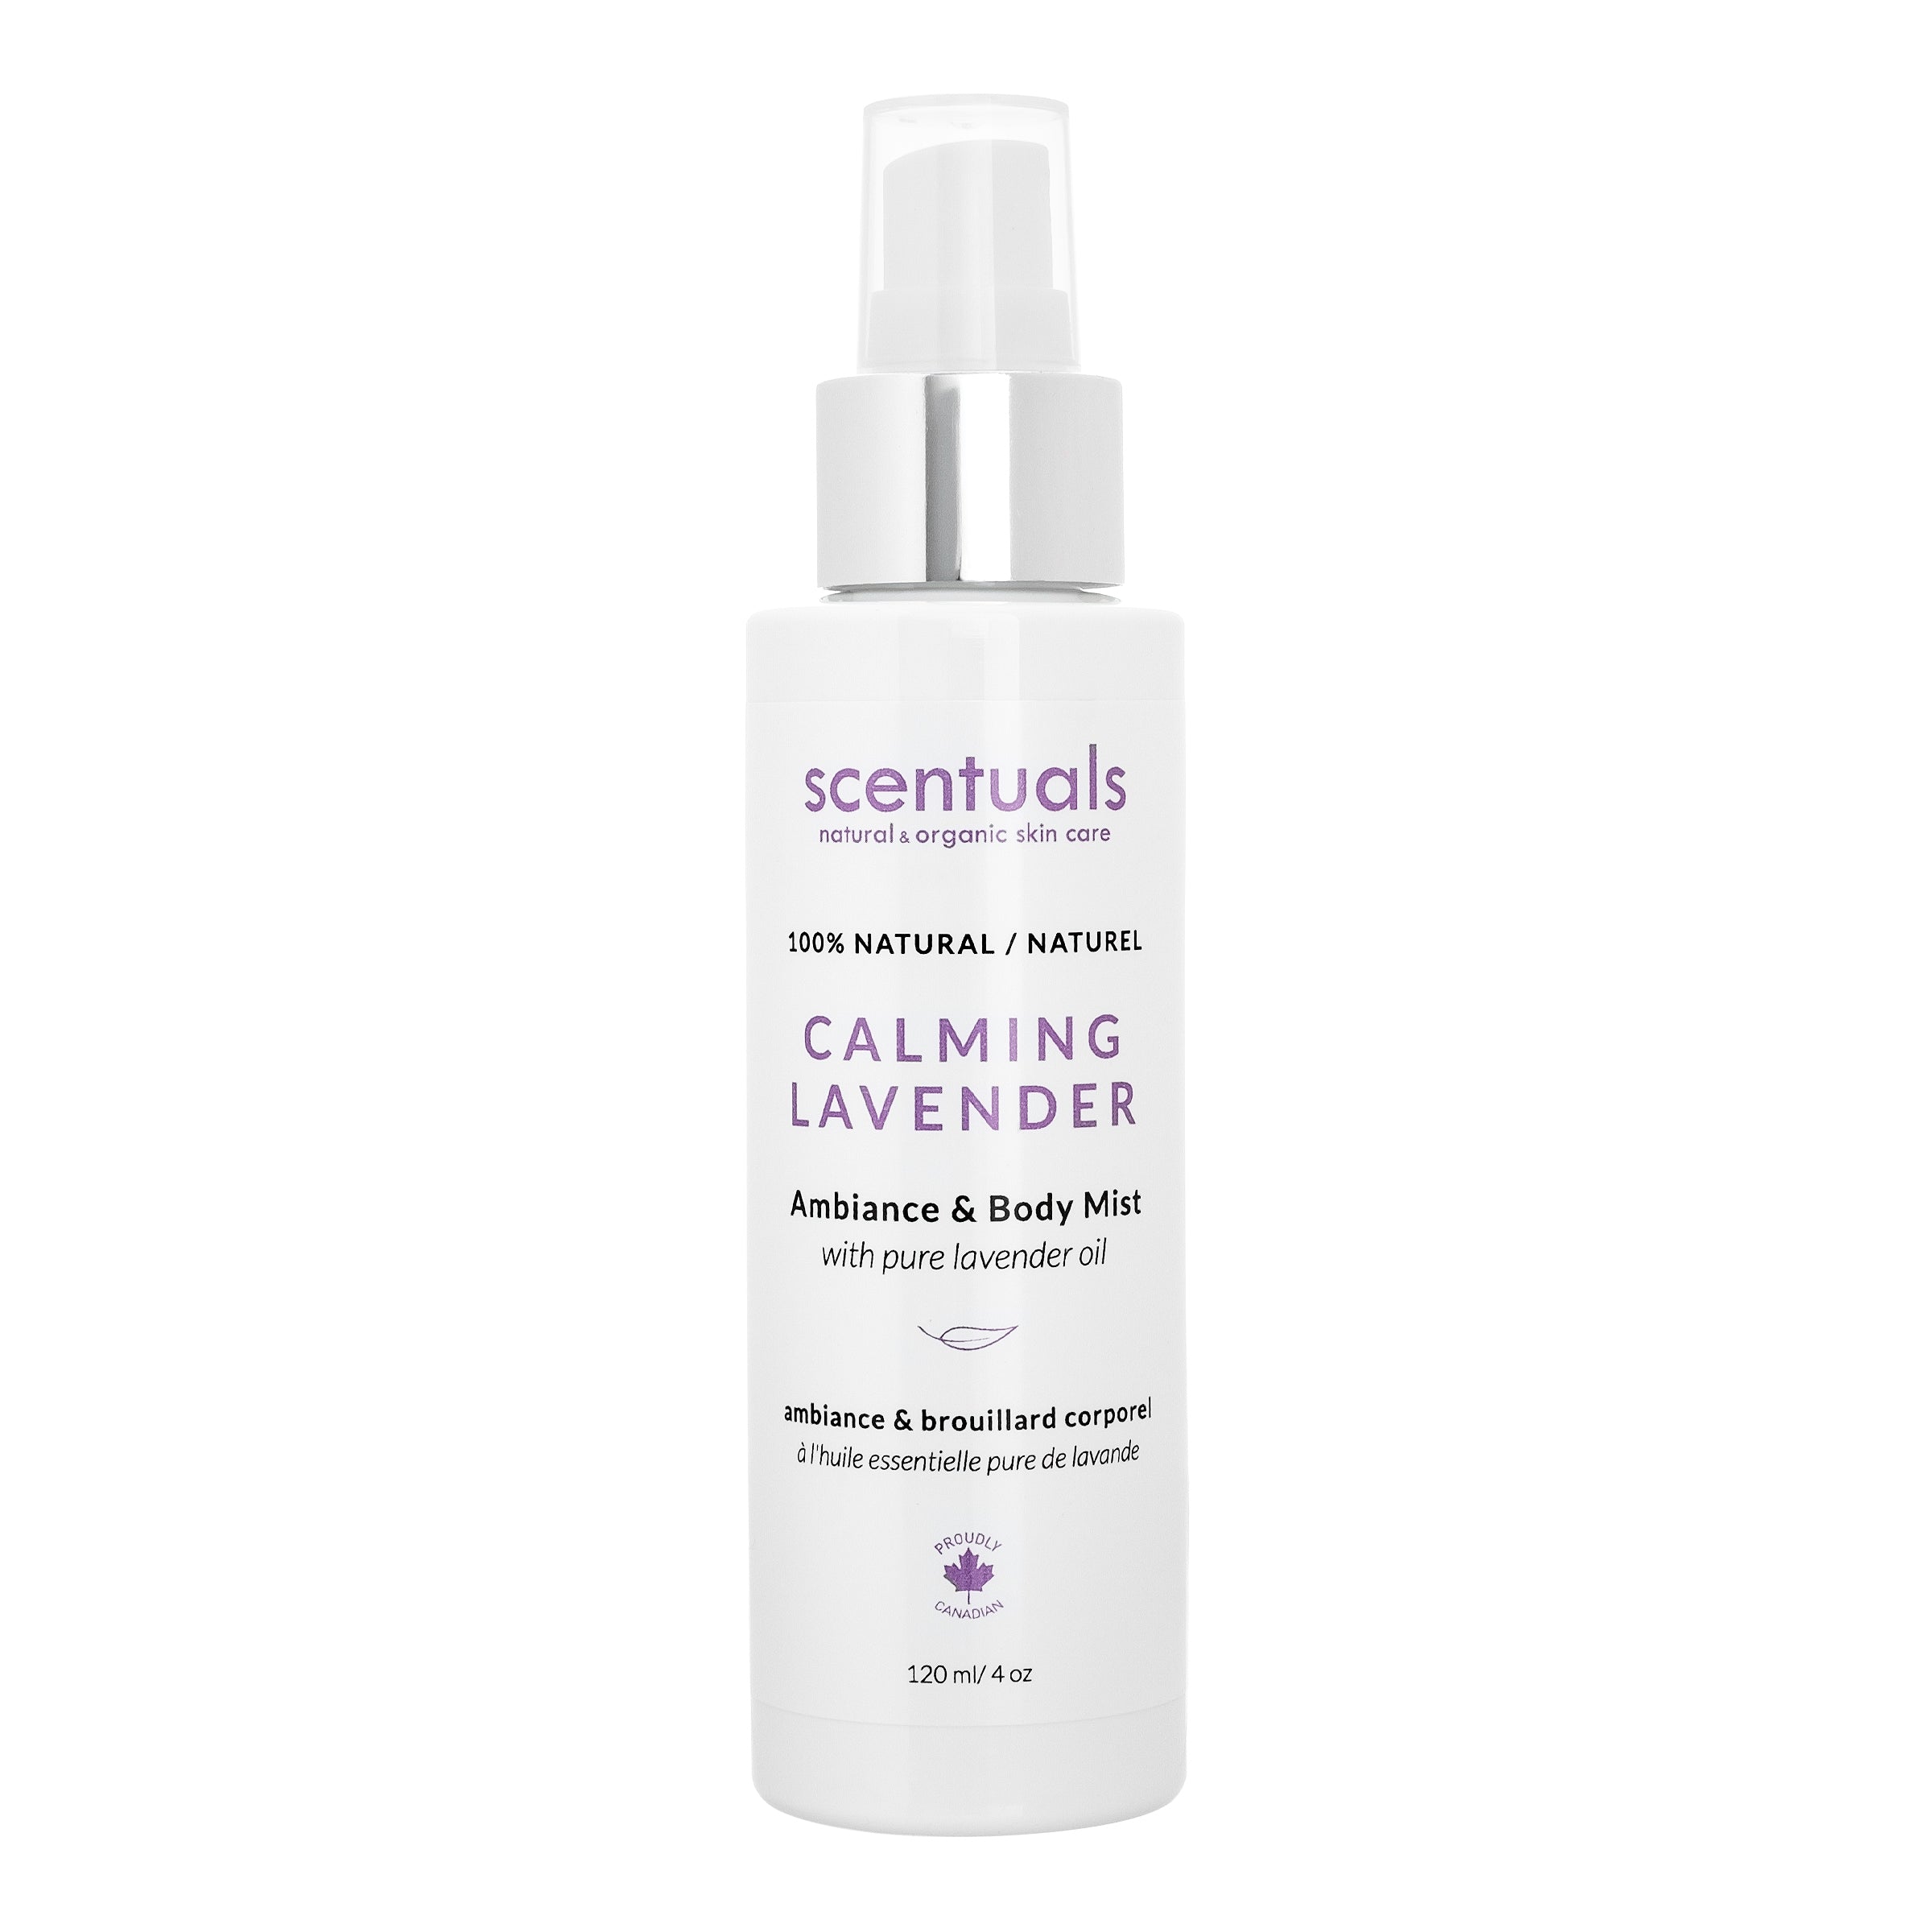 Calming Lavender Ambiance & Body Mist